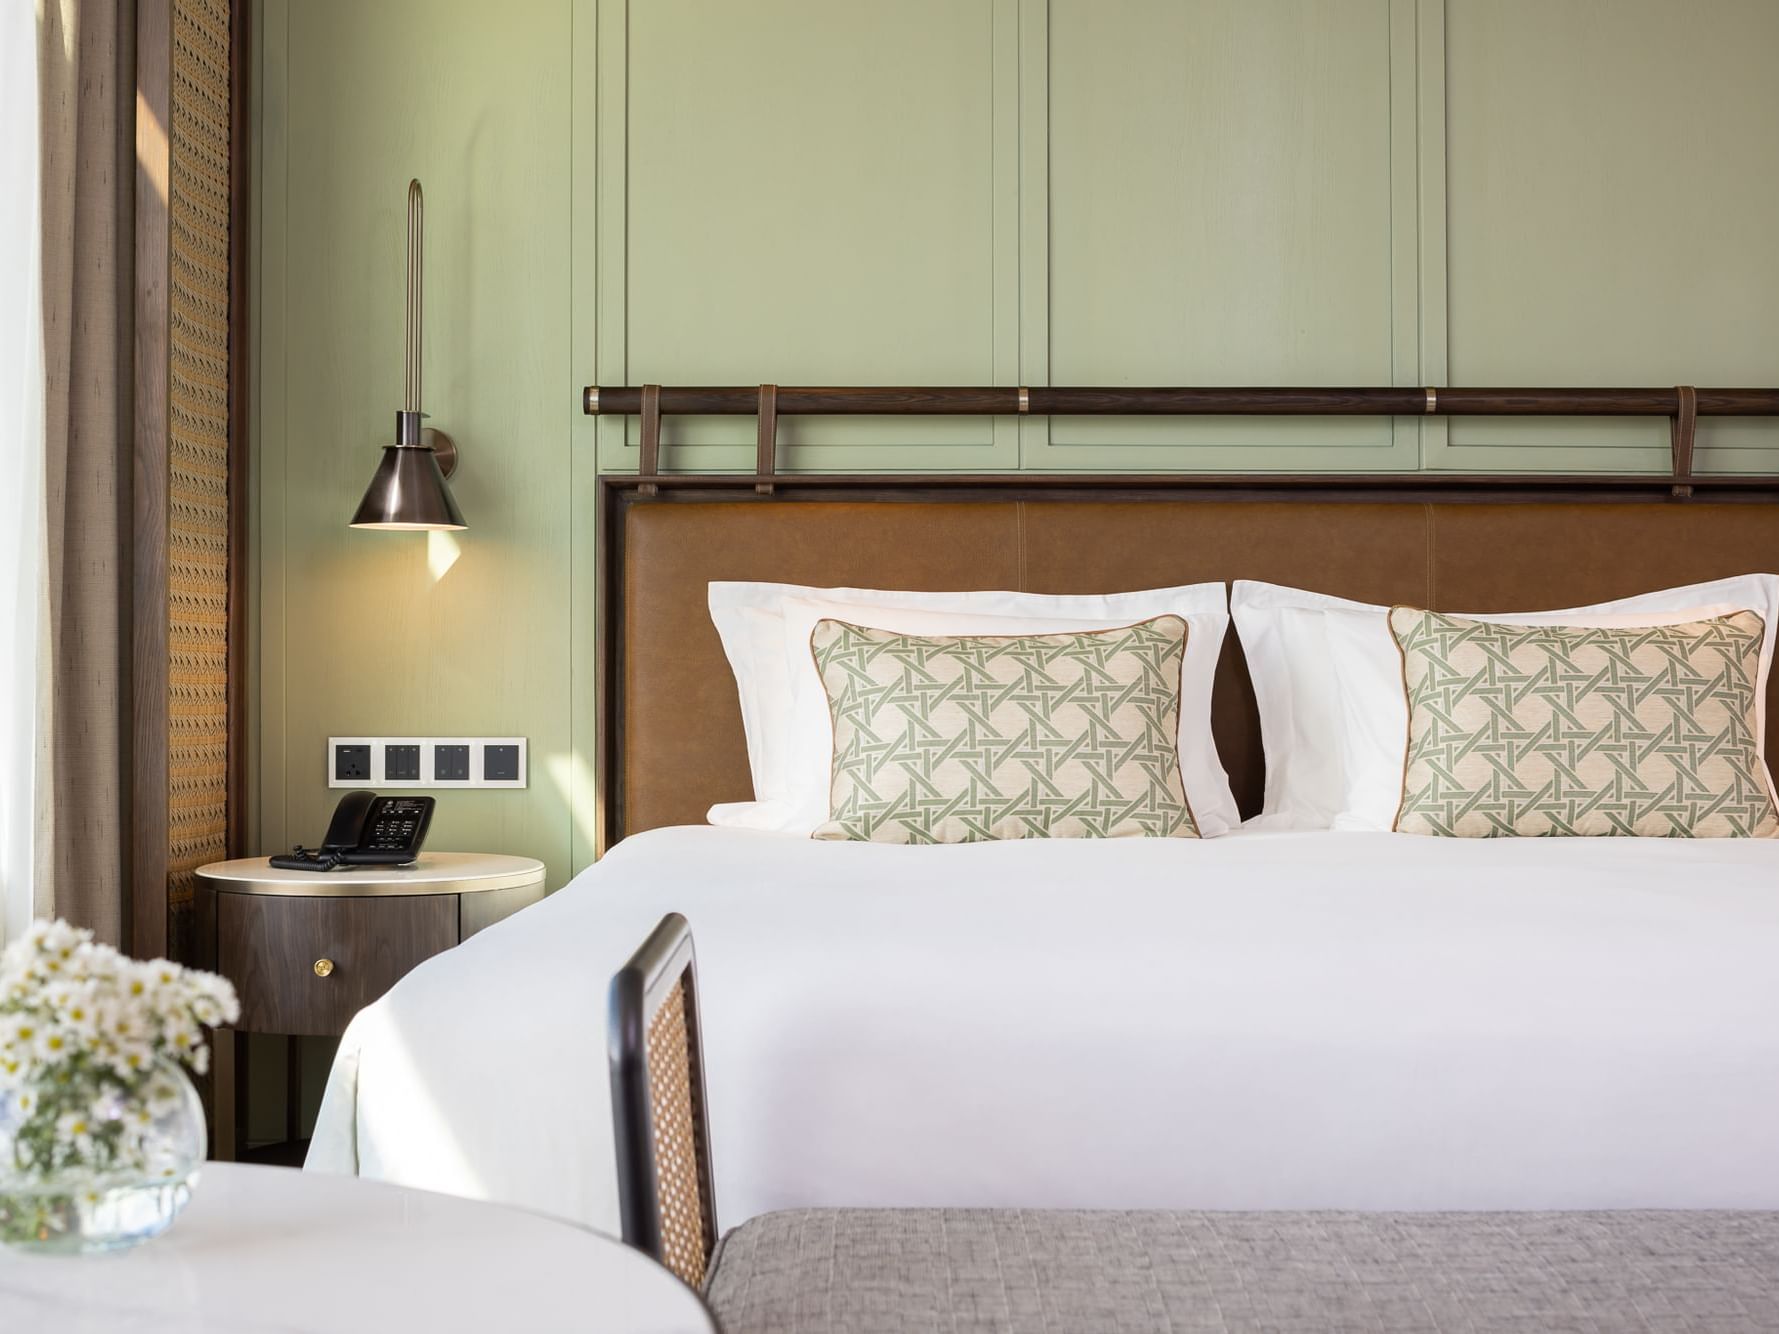 Lamp by the King bed with comfy pillows in One bedroom suite at Eastin Grand Hotel Phayathai